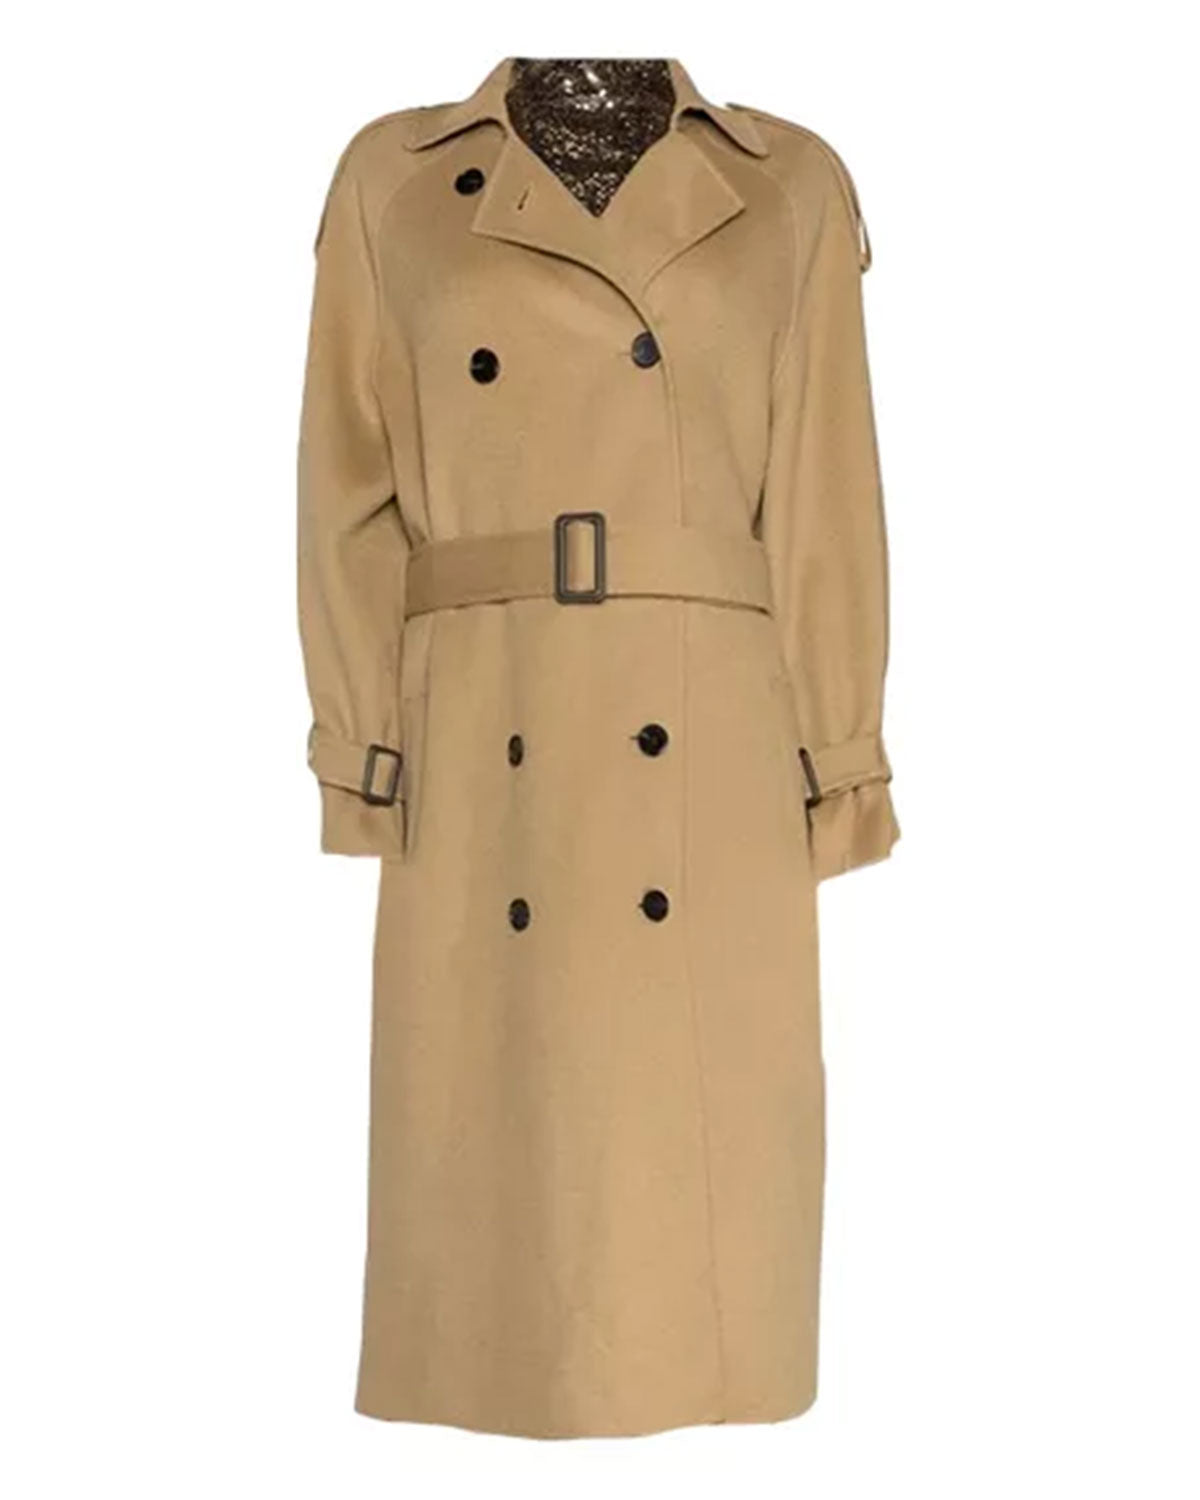 MotorCycleJackets Womens Beige Double Breasted Wool Trench Coat